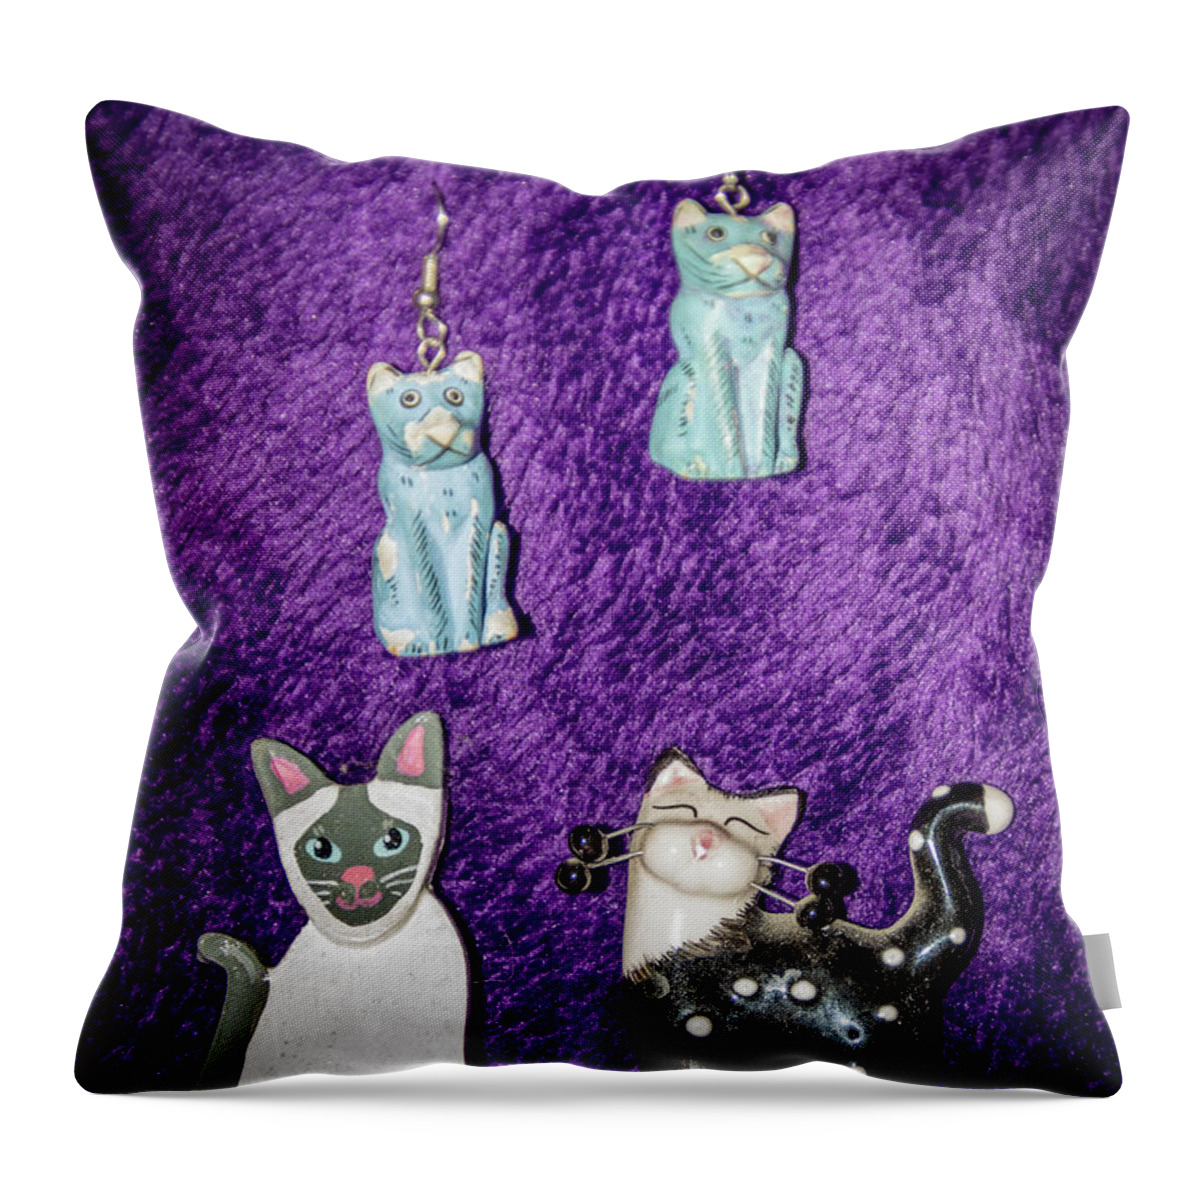 Cat Throw Pillow featuring the photograph Cat Lover Wardrobe Accessories by Her Arts Desire